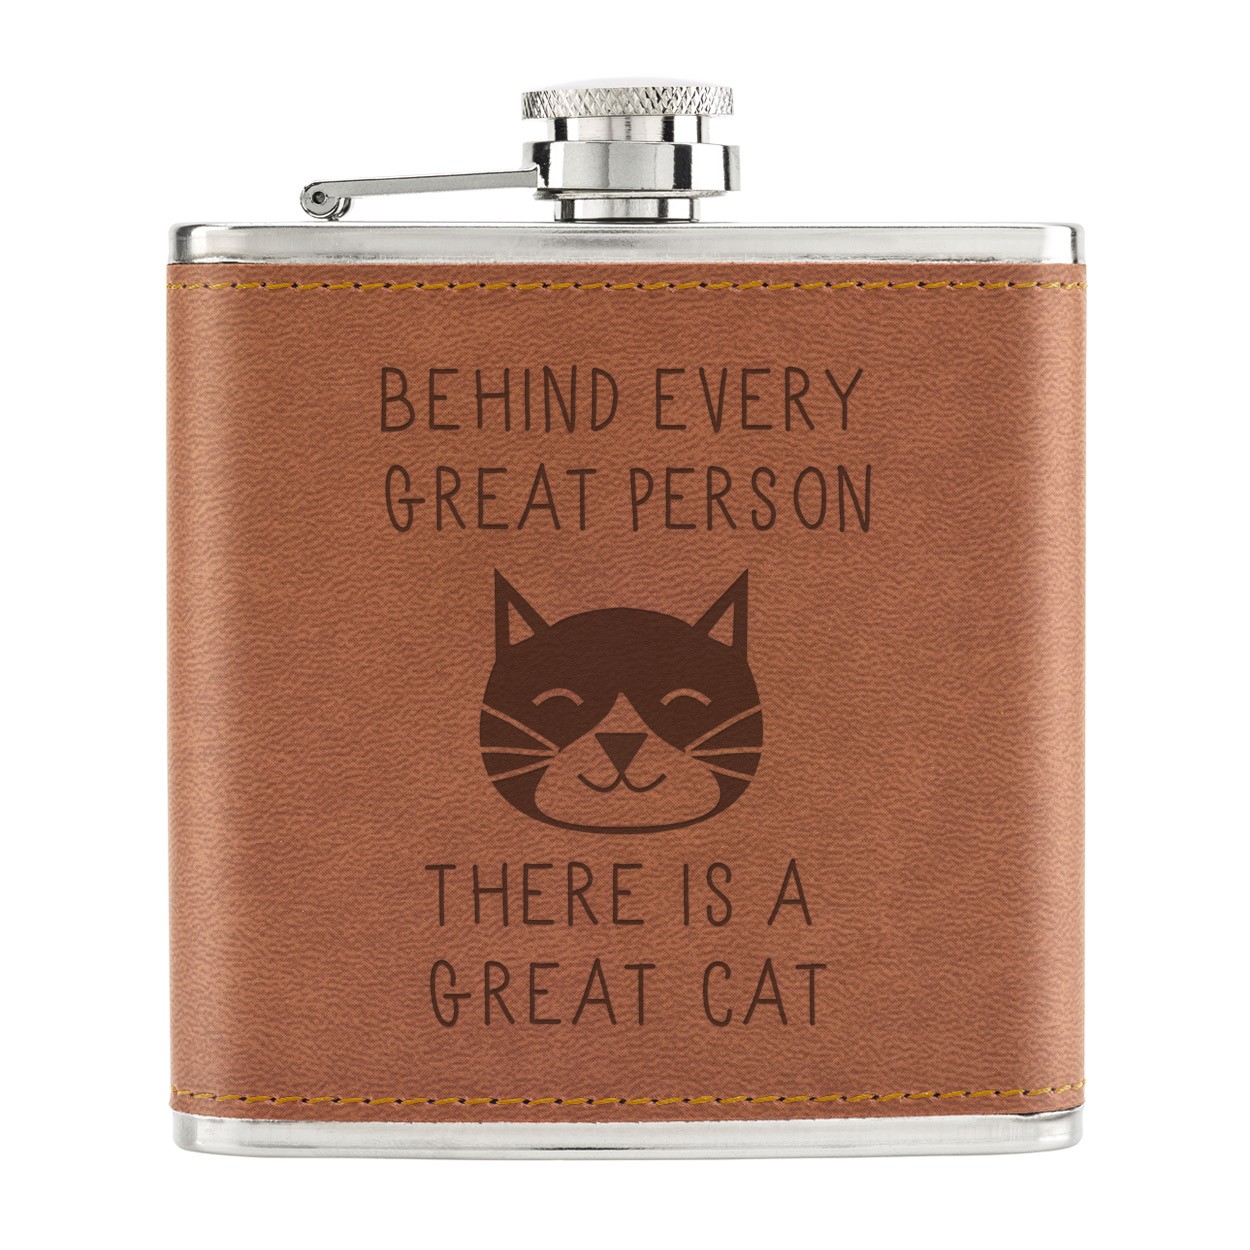 Behind Every Great Person Is A Great Cat 6oz PU Leather Hip Flask Tan